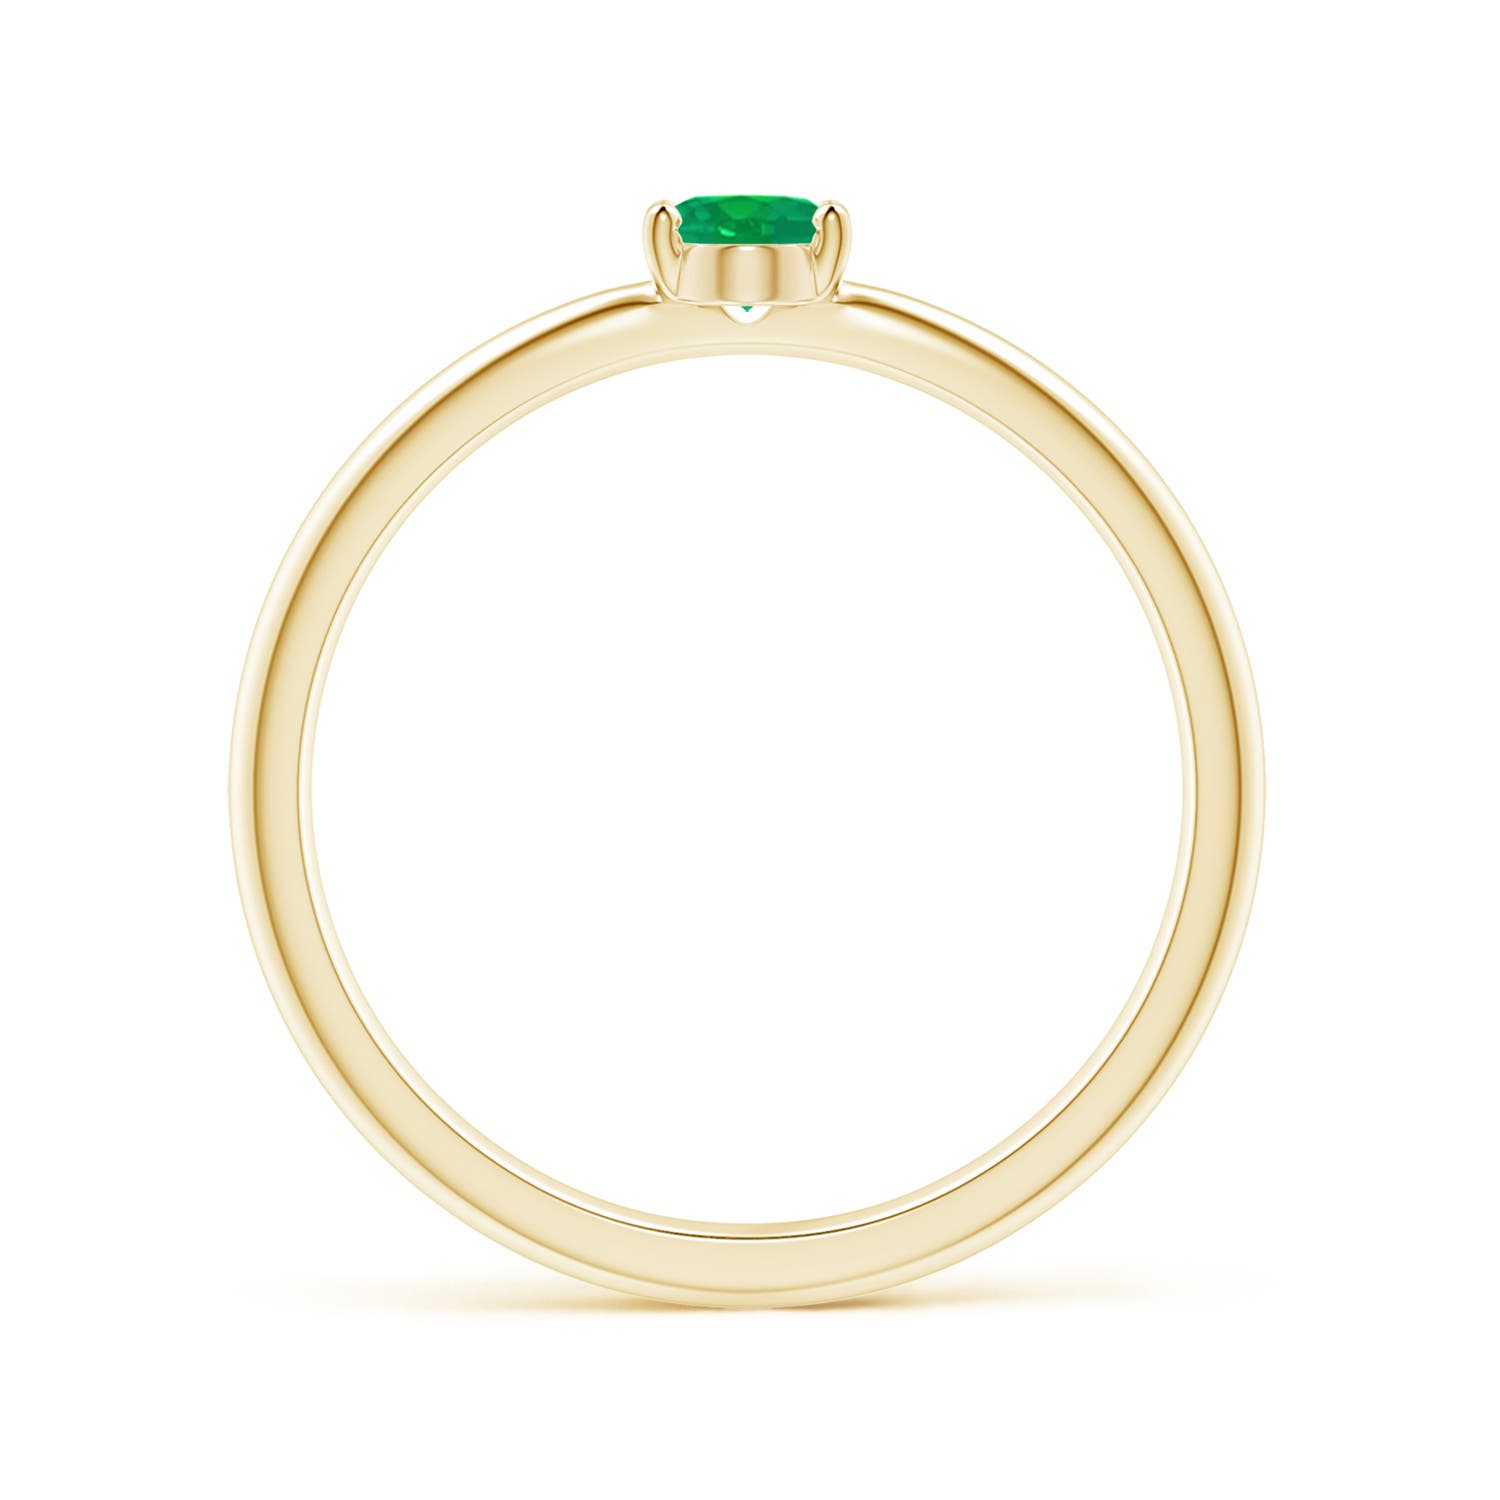 AA - Emerald / 0.3 CT / 14 KT Yellow Gold